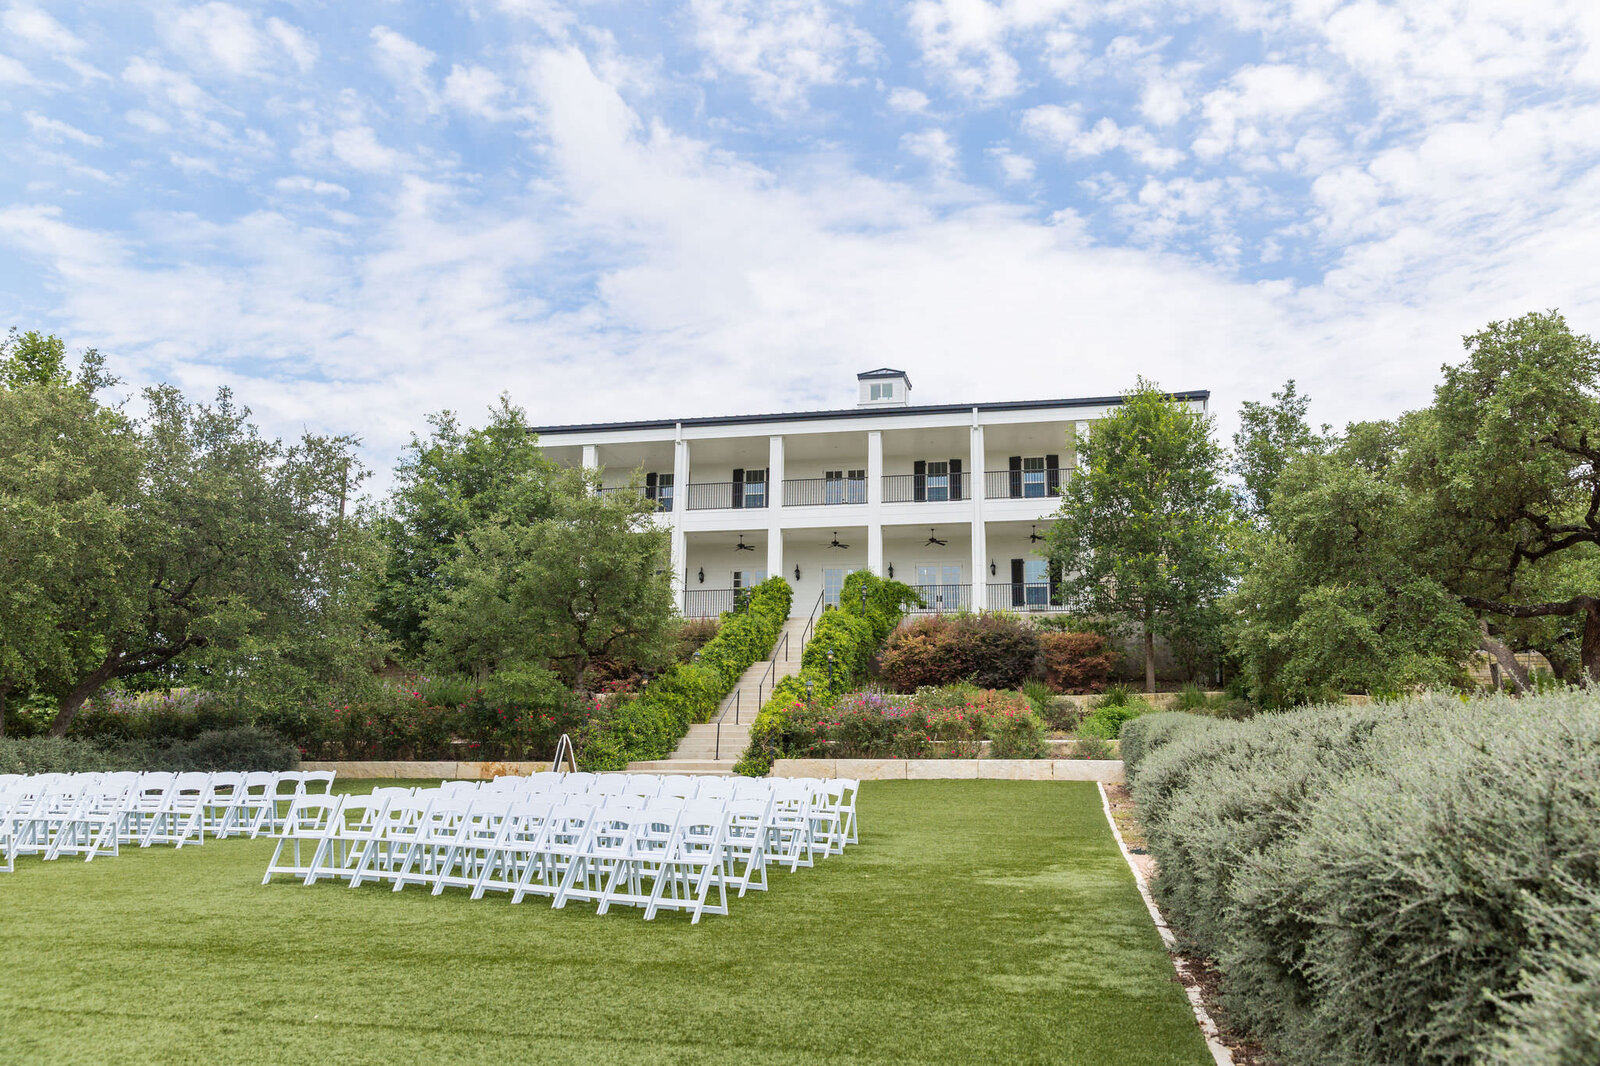 The outdoor ceremony site at Kendall Point San Antoni wedding venue.